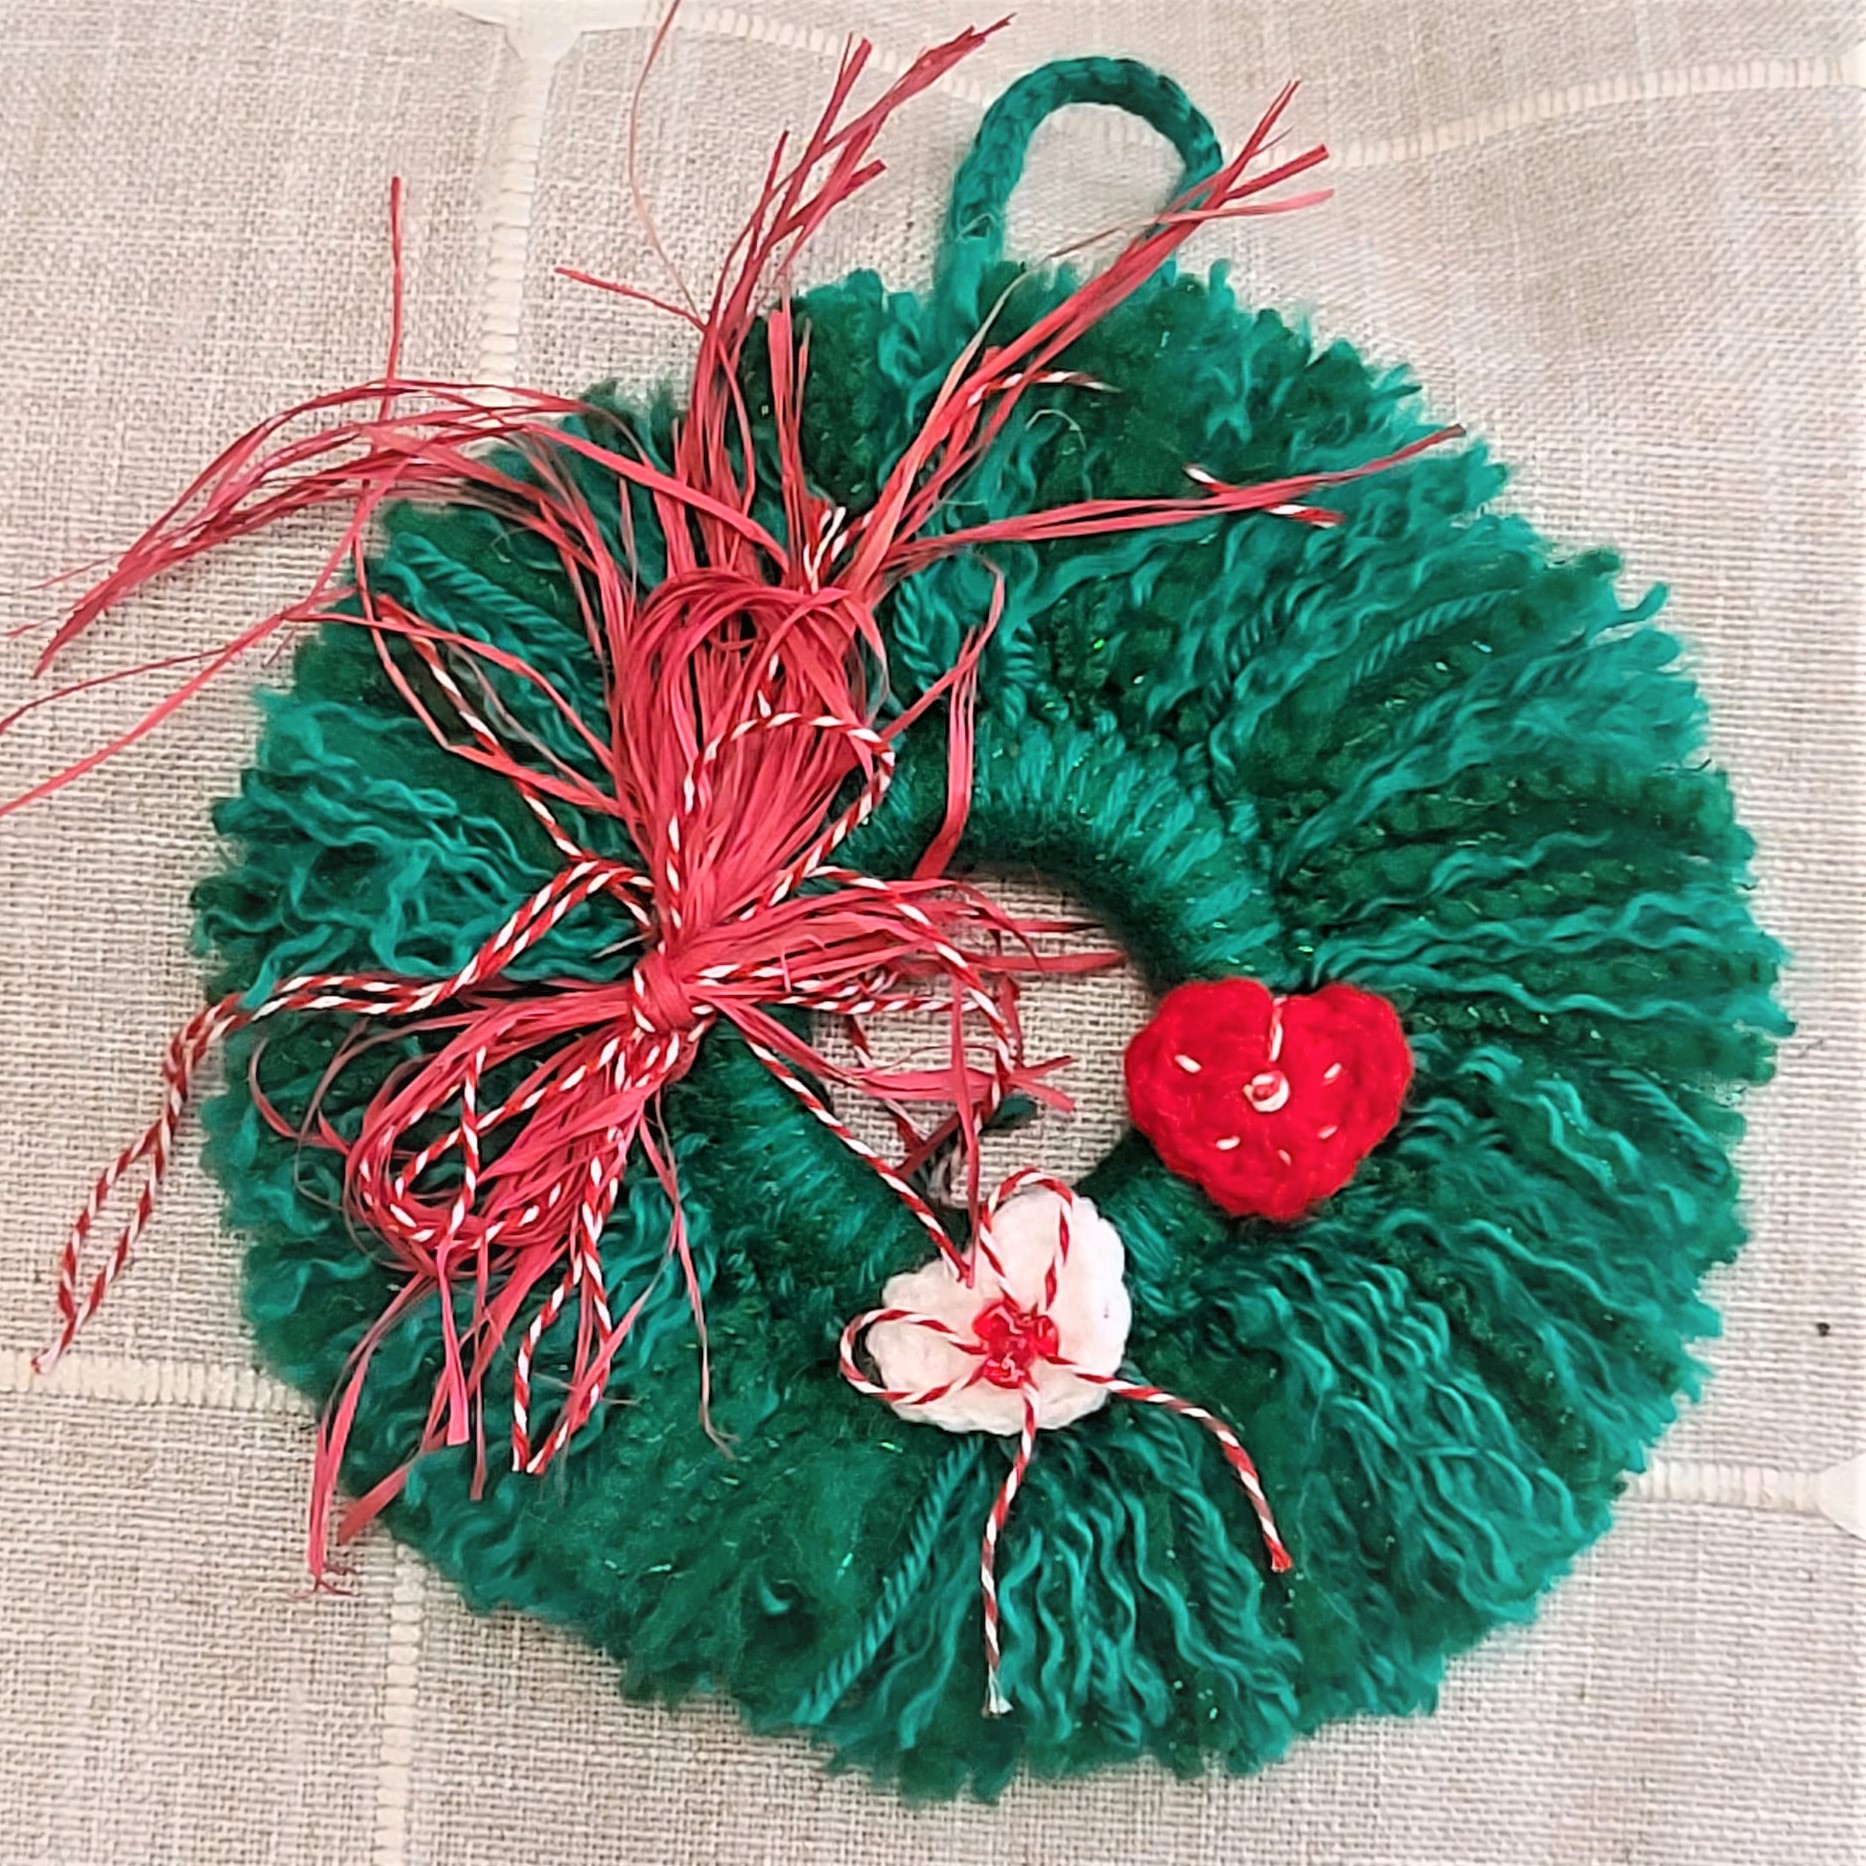 Mini yarn wreath ornament 7" Christmas evergreen with red accent